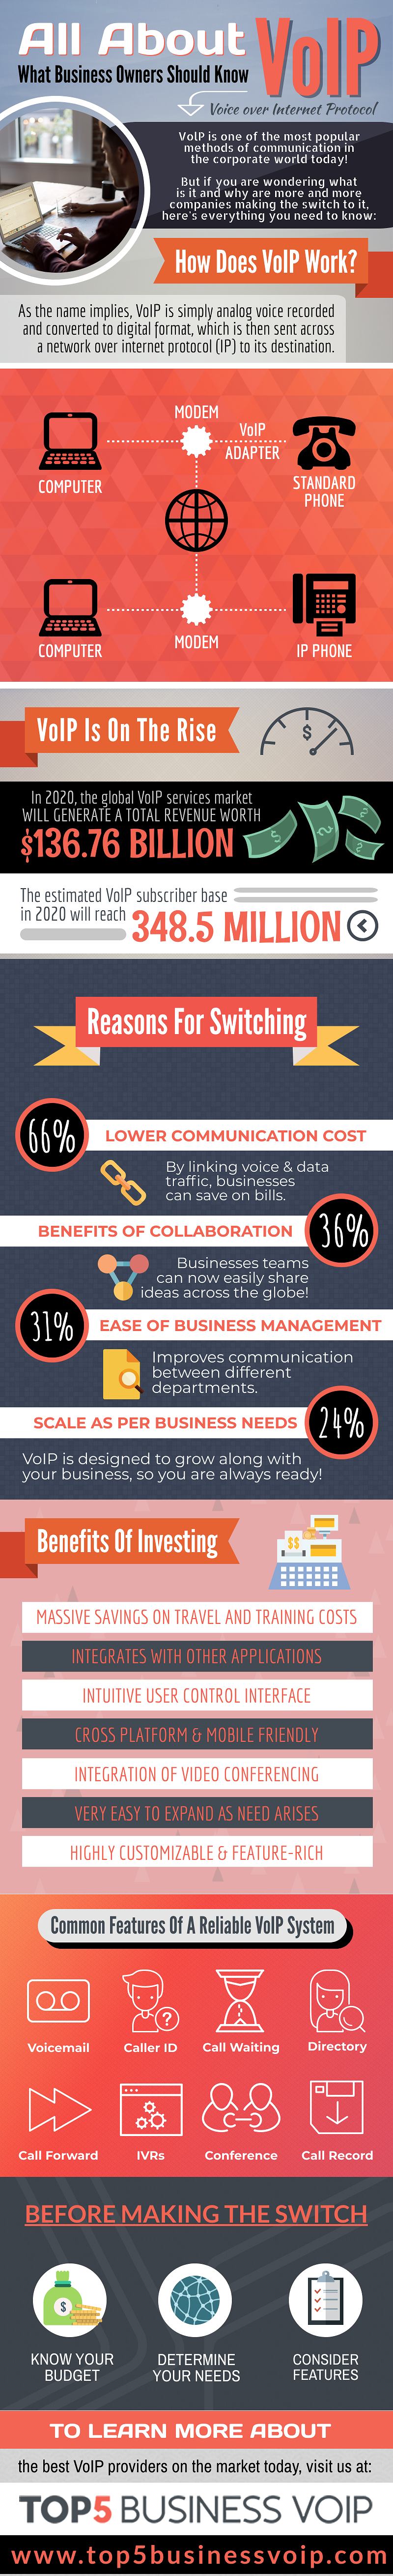 all about voip